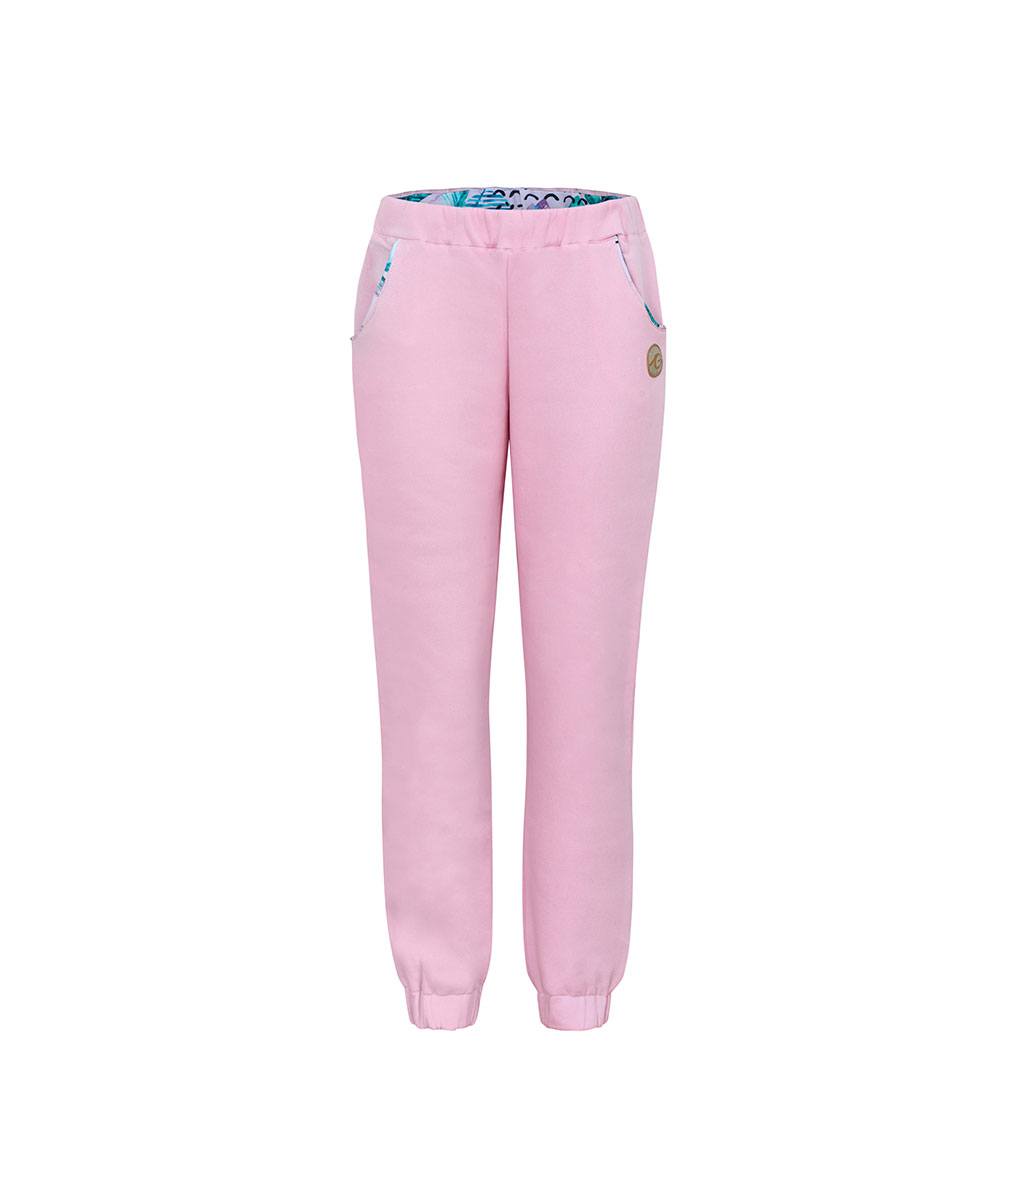 Special Deal! Buy Pink Pants Outfit: Feathers Pants